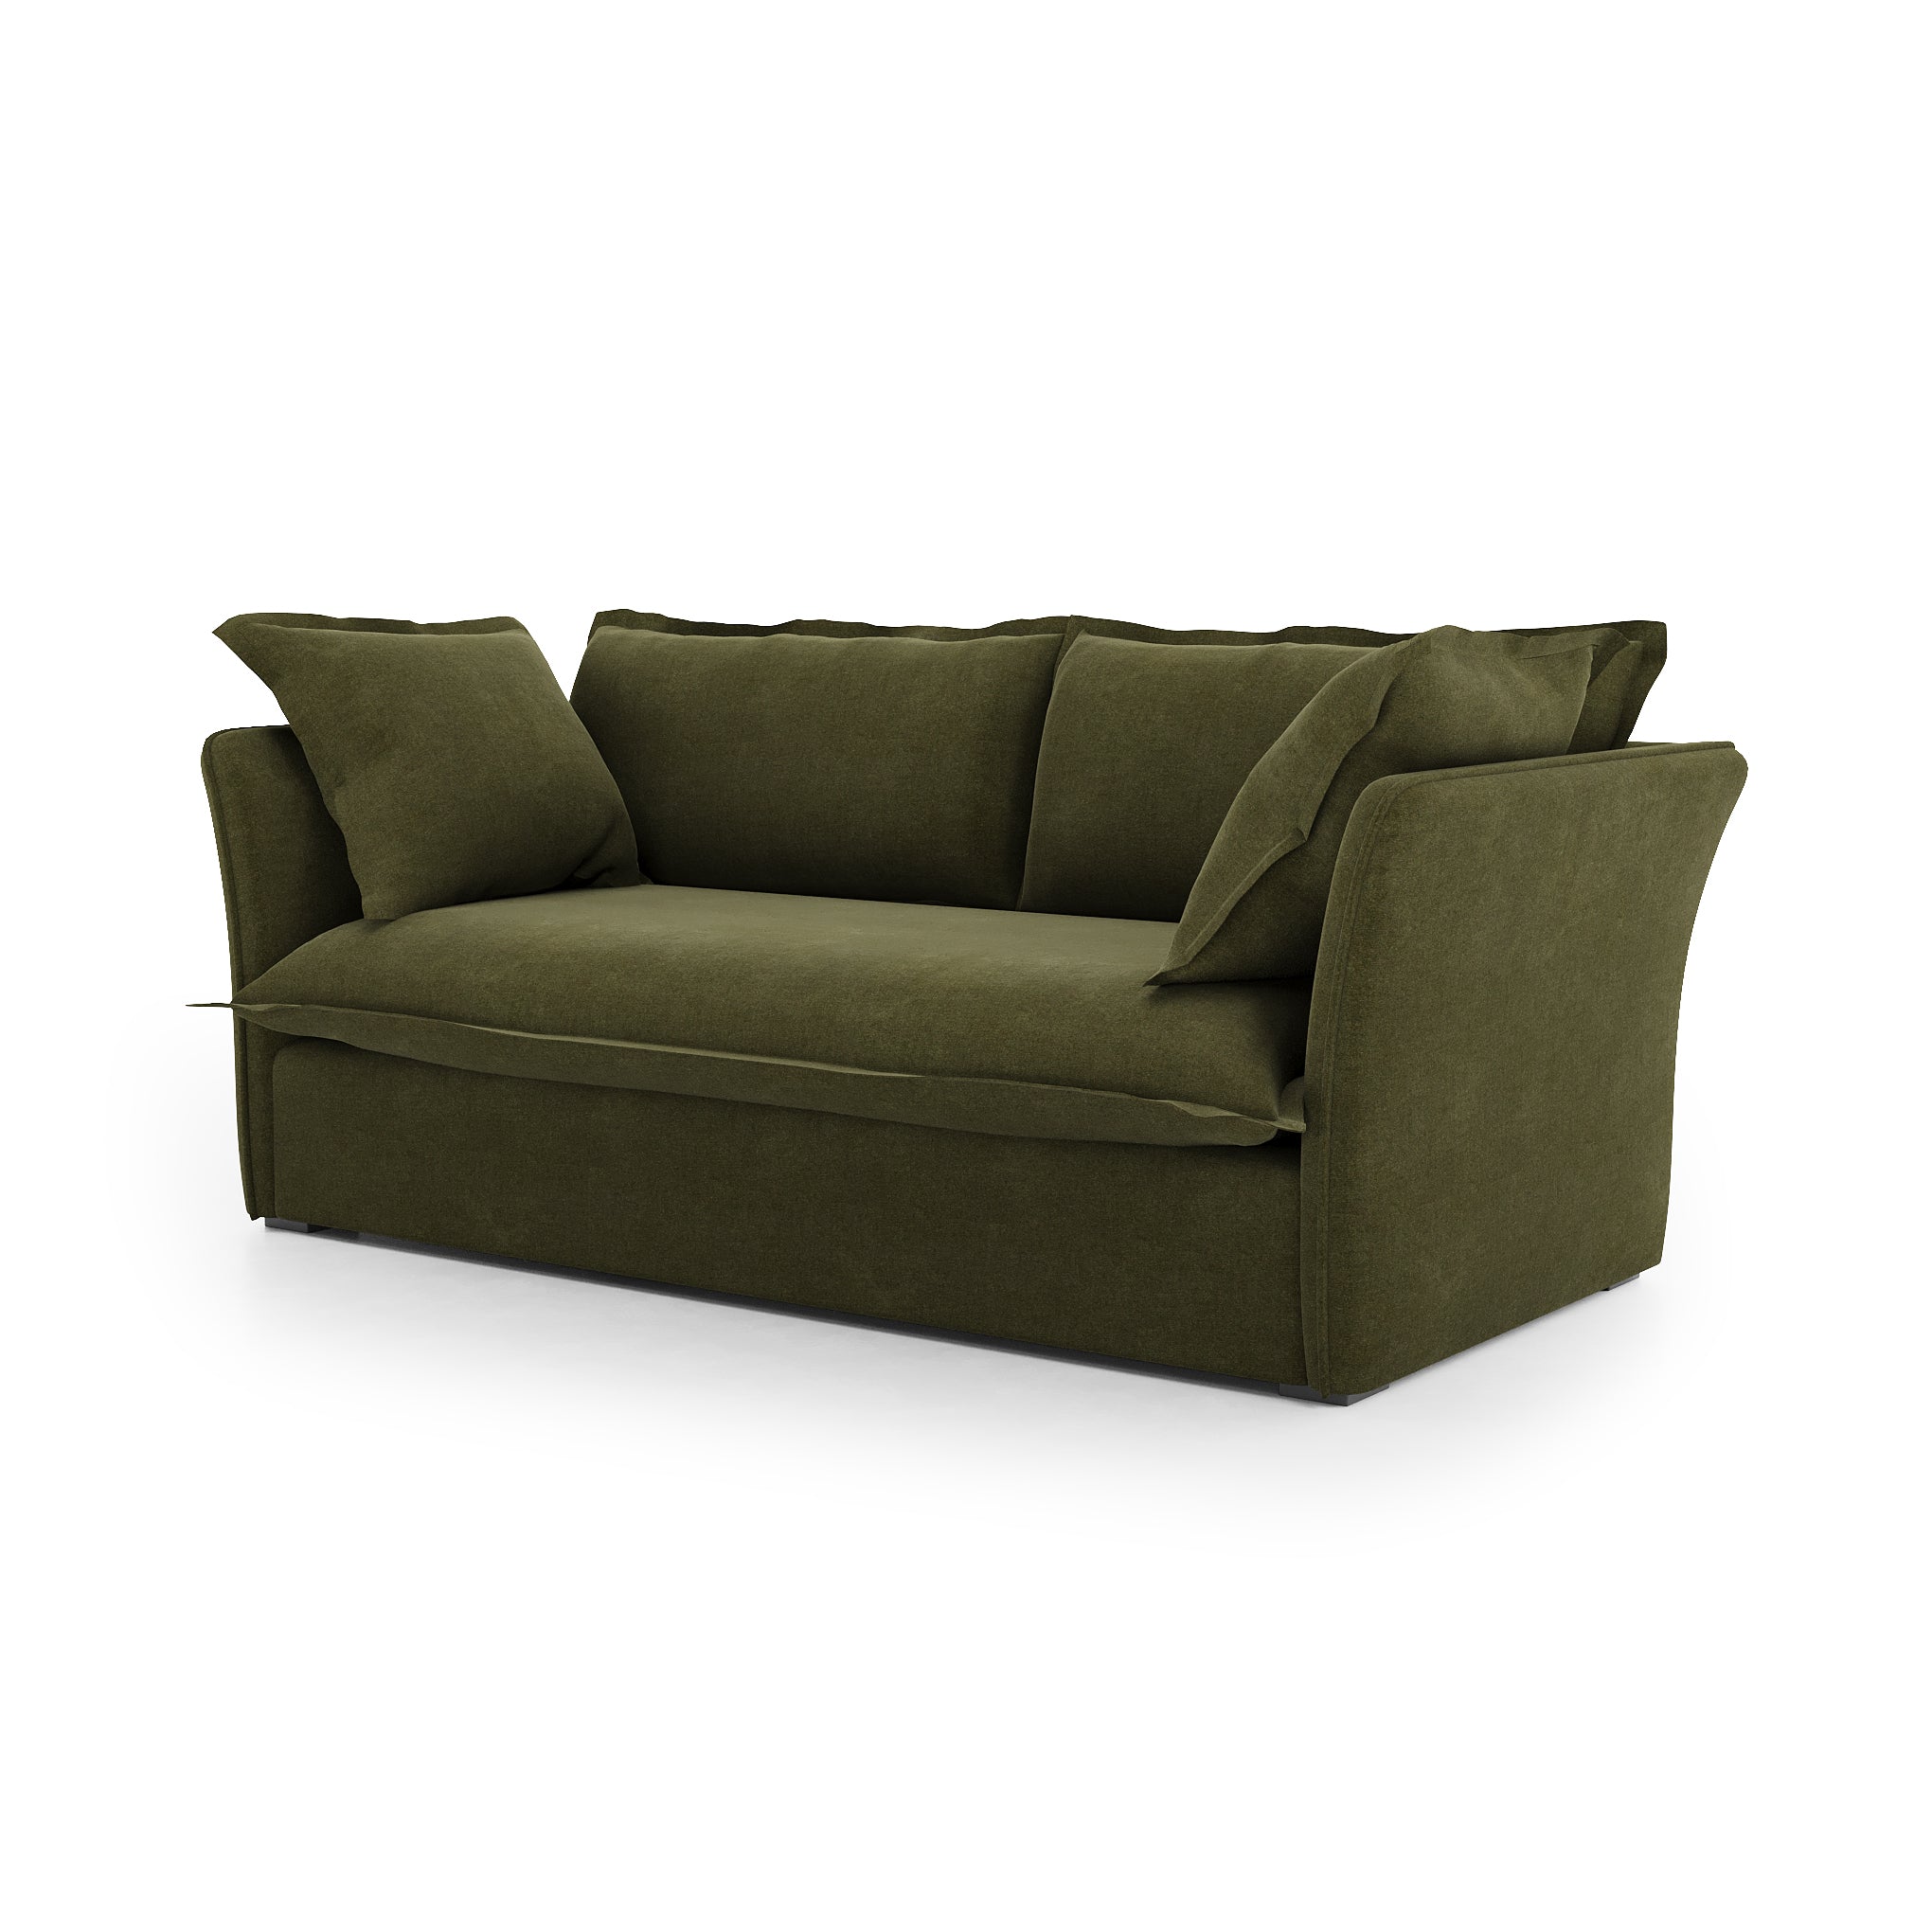 Sunday Sofa forest velvet angled view Items range from $2299.00 to $2699.00